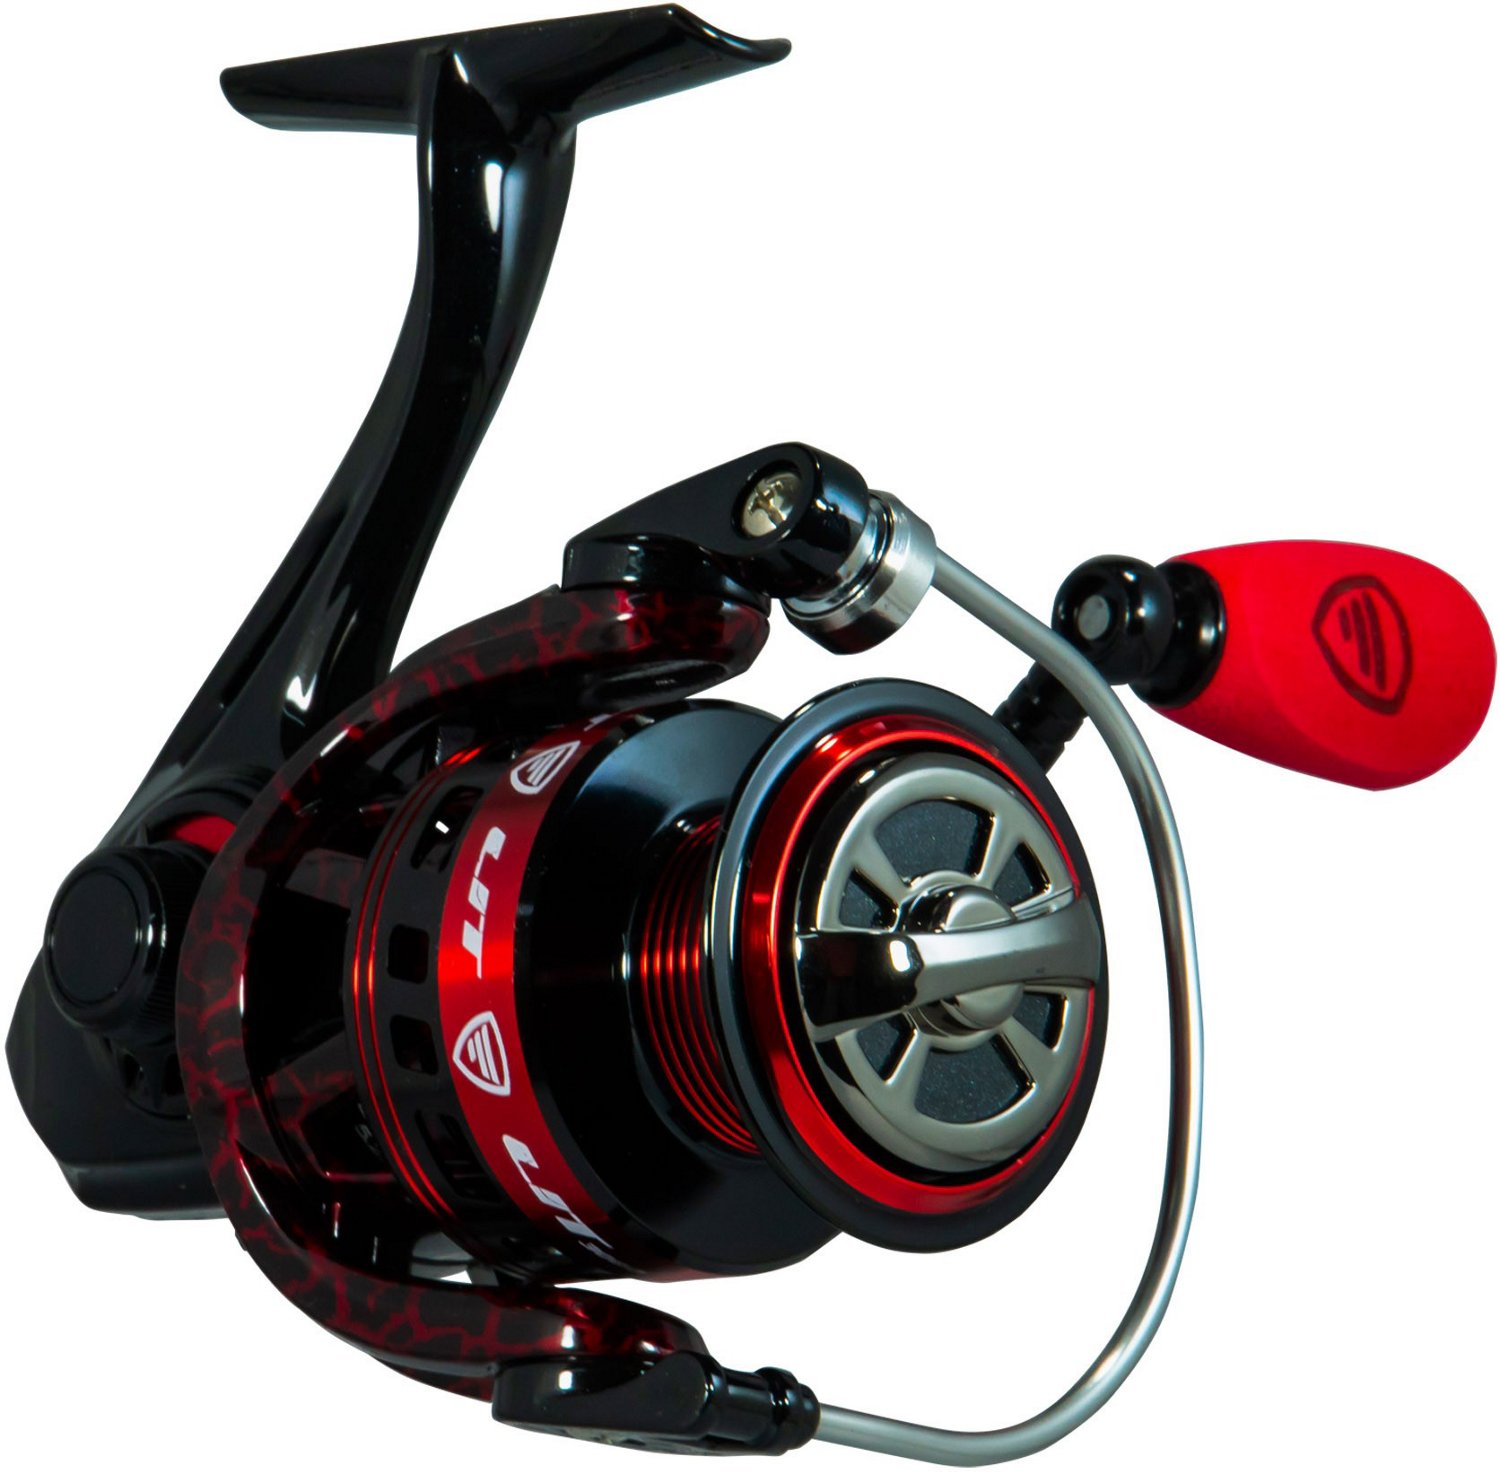 Academy Sports + Outdoors Favorite Fishing Lit Spinning Reel